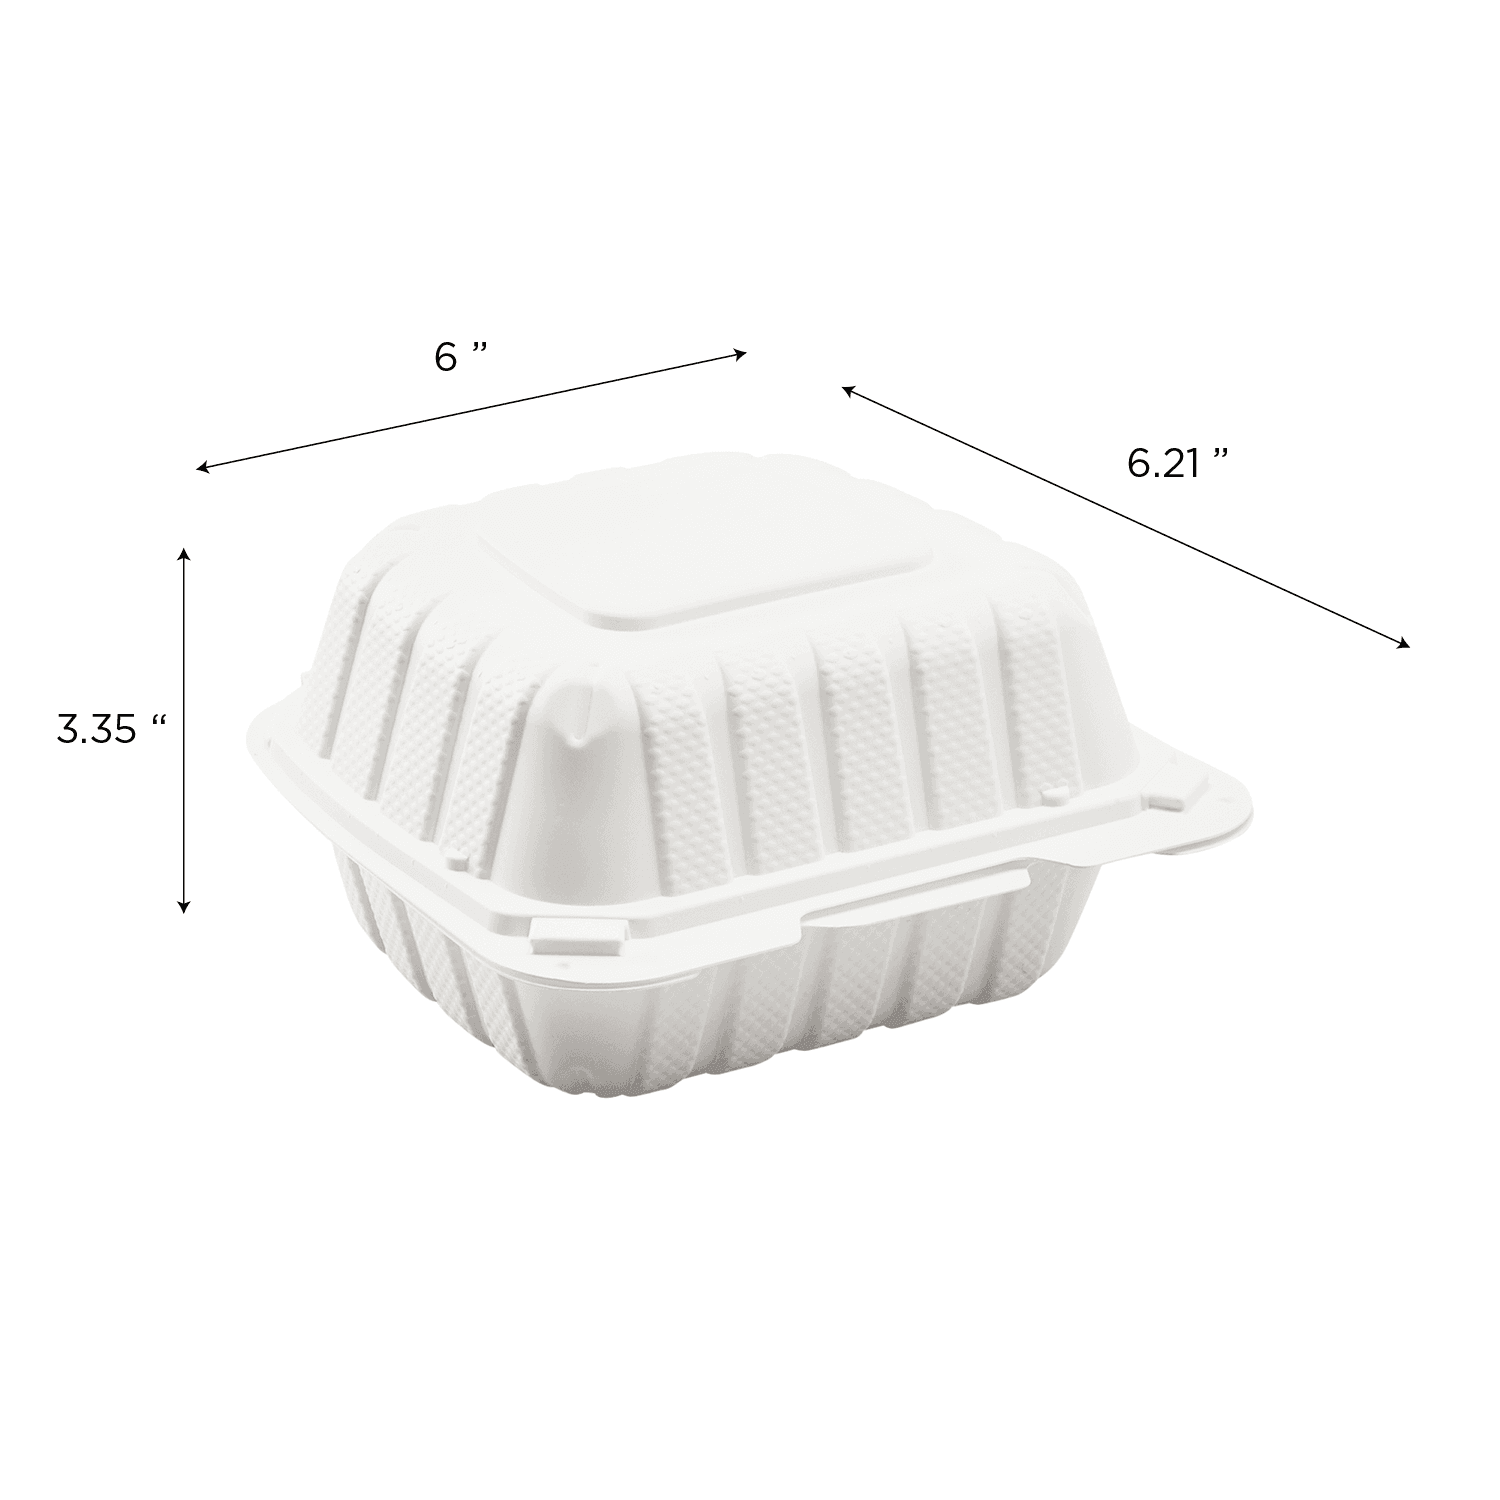 Karat Earth 6" x 6" Mineral Filled PP Hinged Container, White - 400 pcs